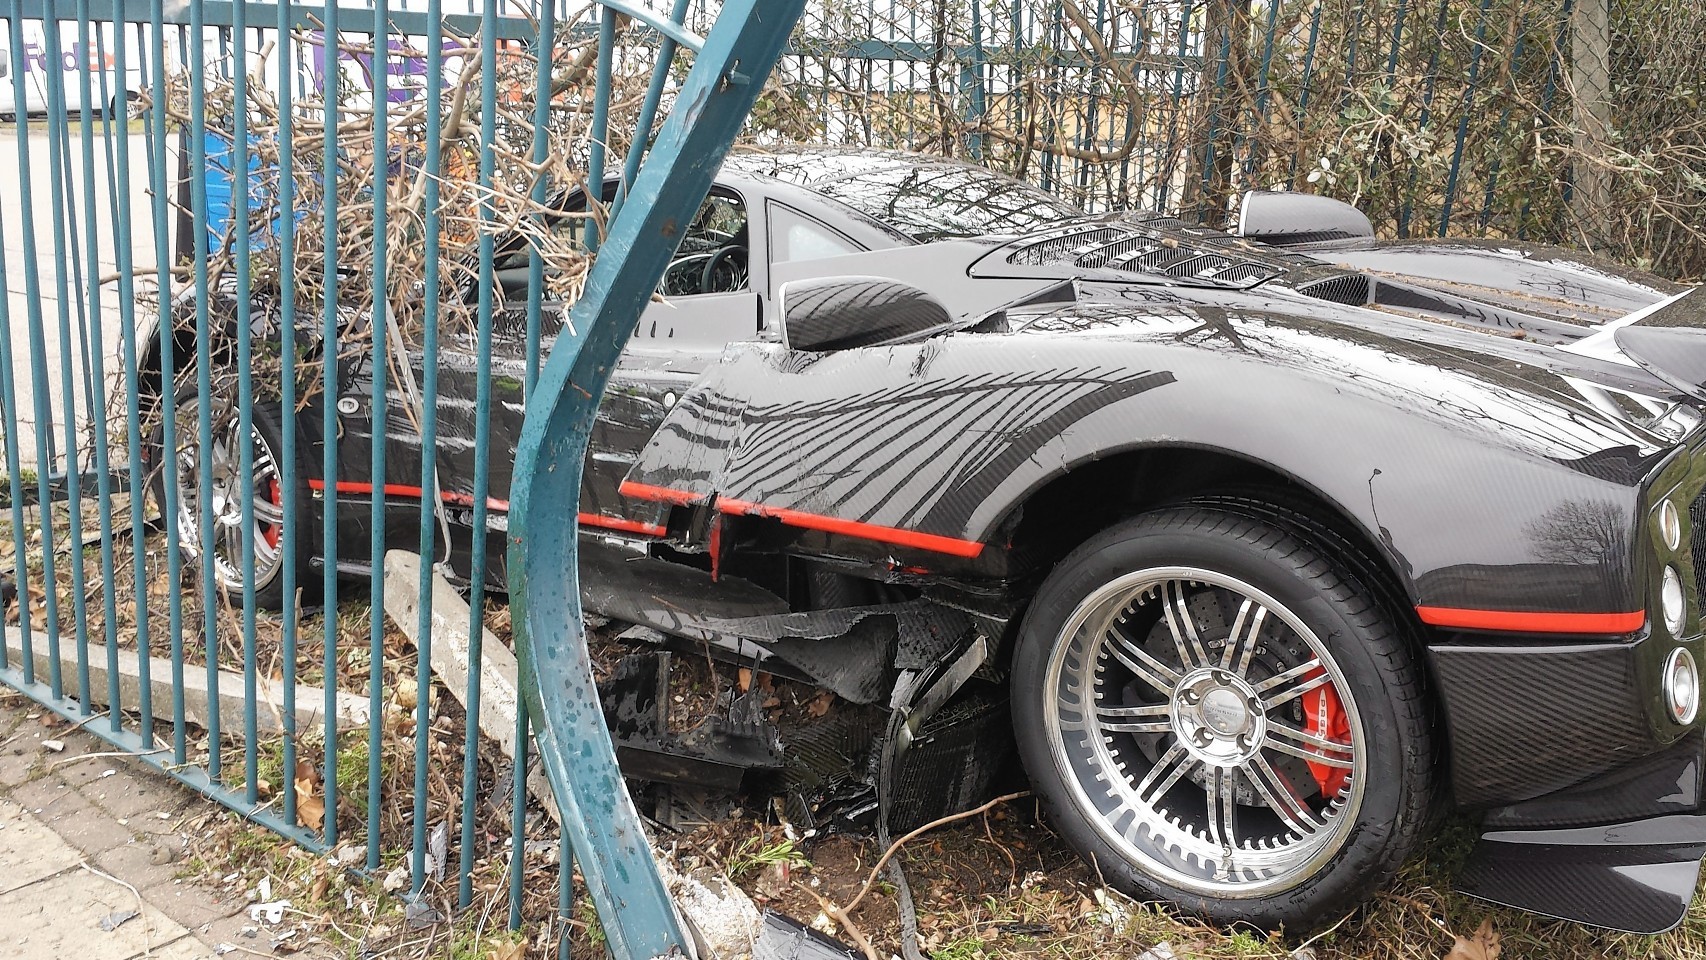 The supercar crashed in London